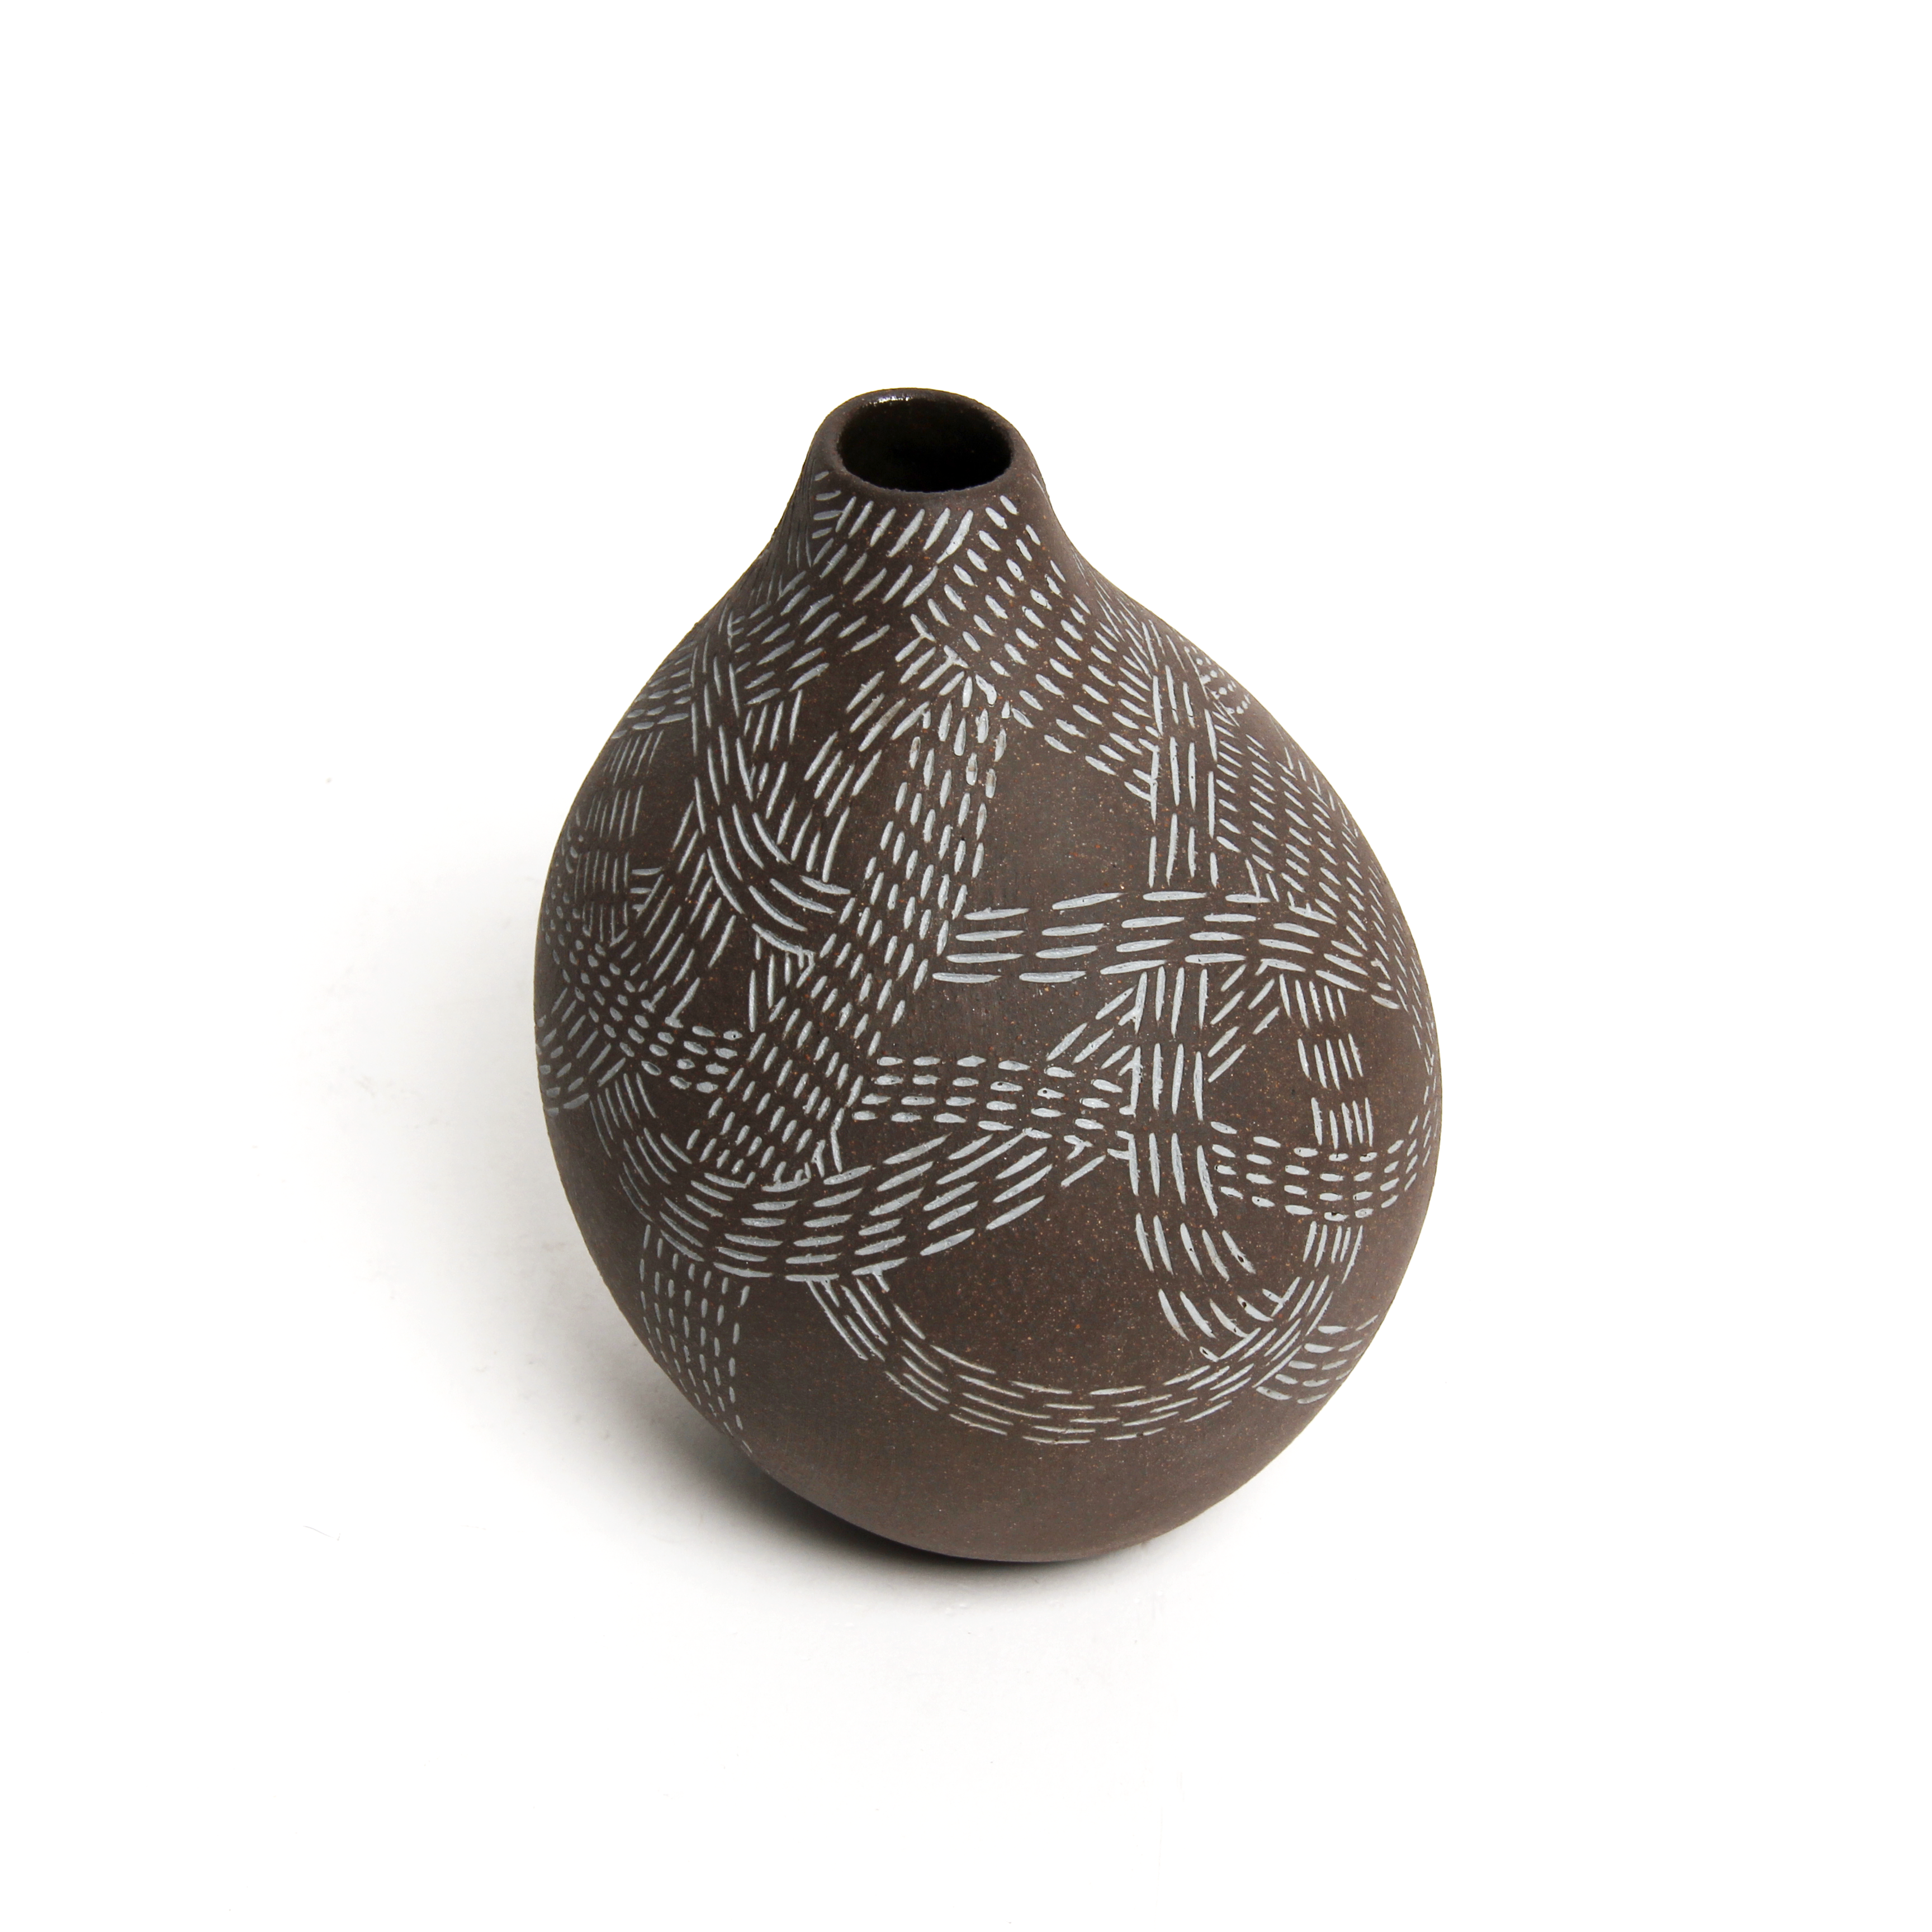 Talia Silva: Small Black and Blue Inlay Vessel (Each sold separately) Product Image 5 of 5